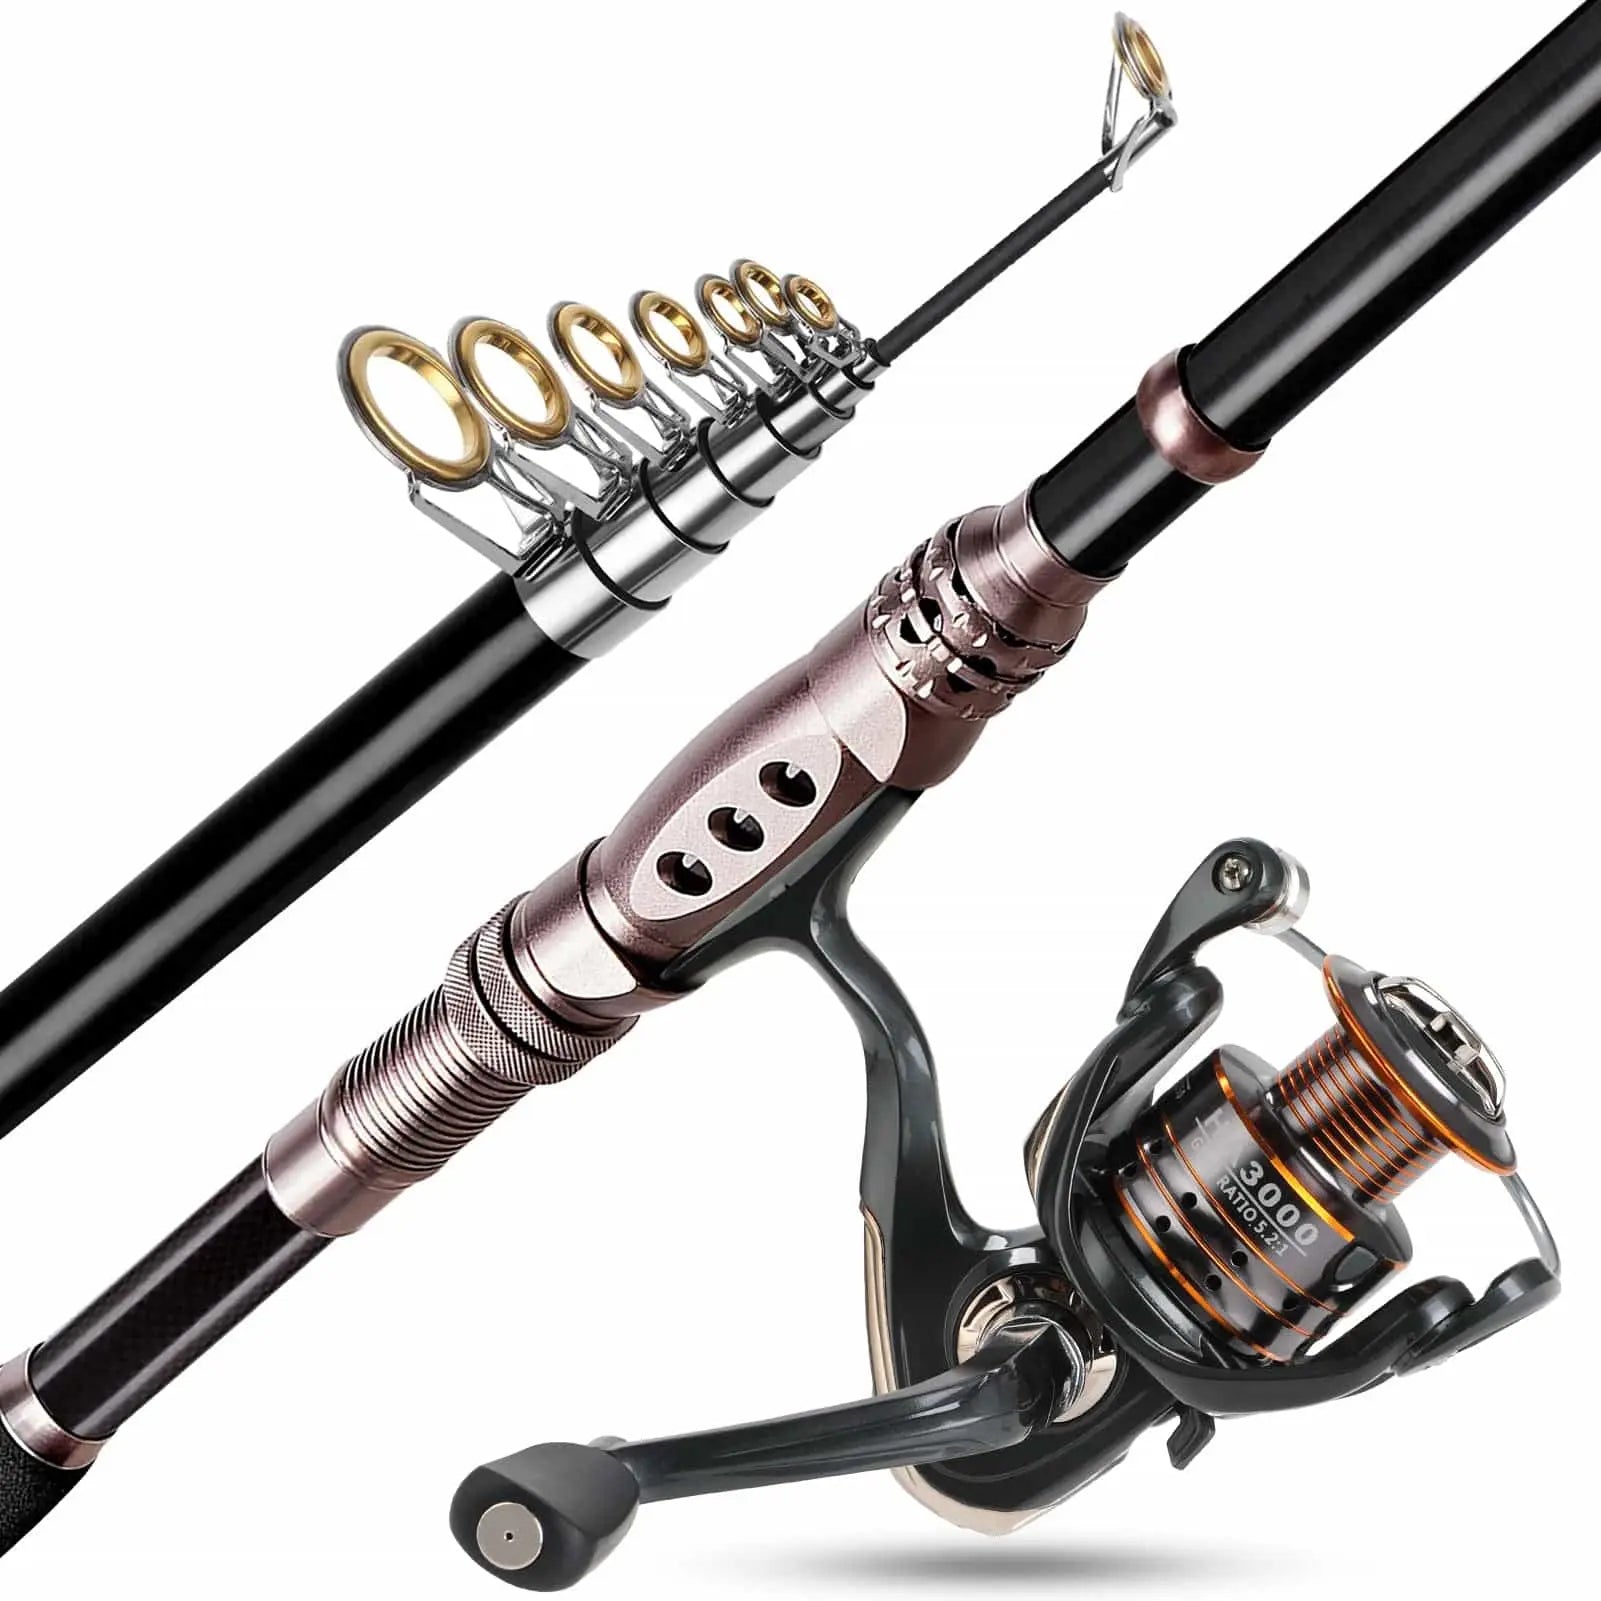 PLUSINNO Ladies Telescopic Pink Fishing Rod and Reel Combos